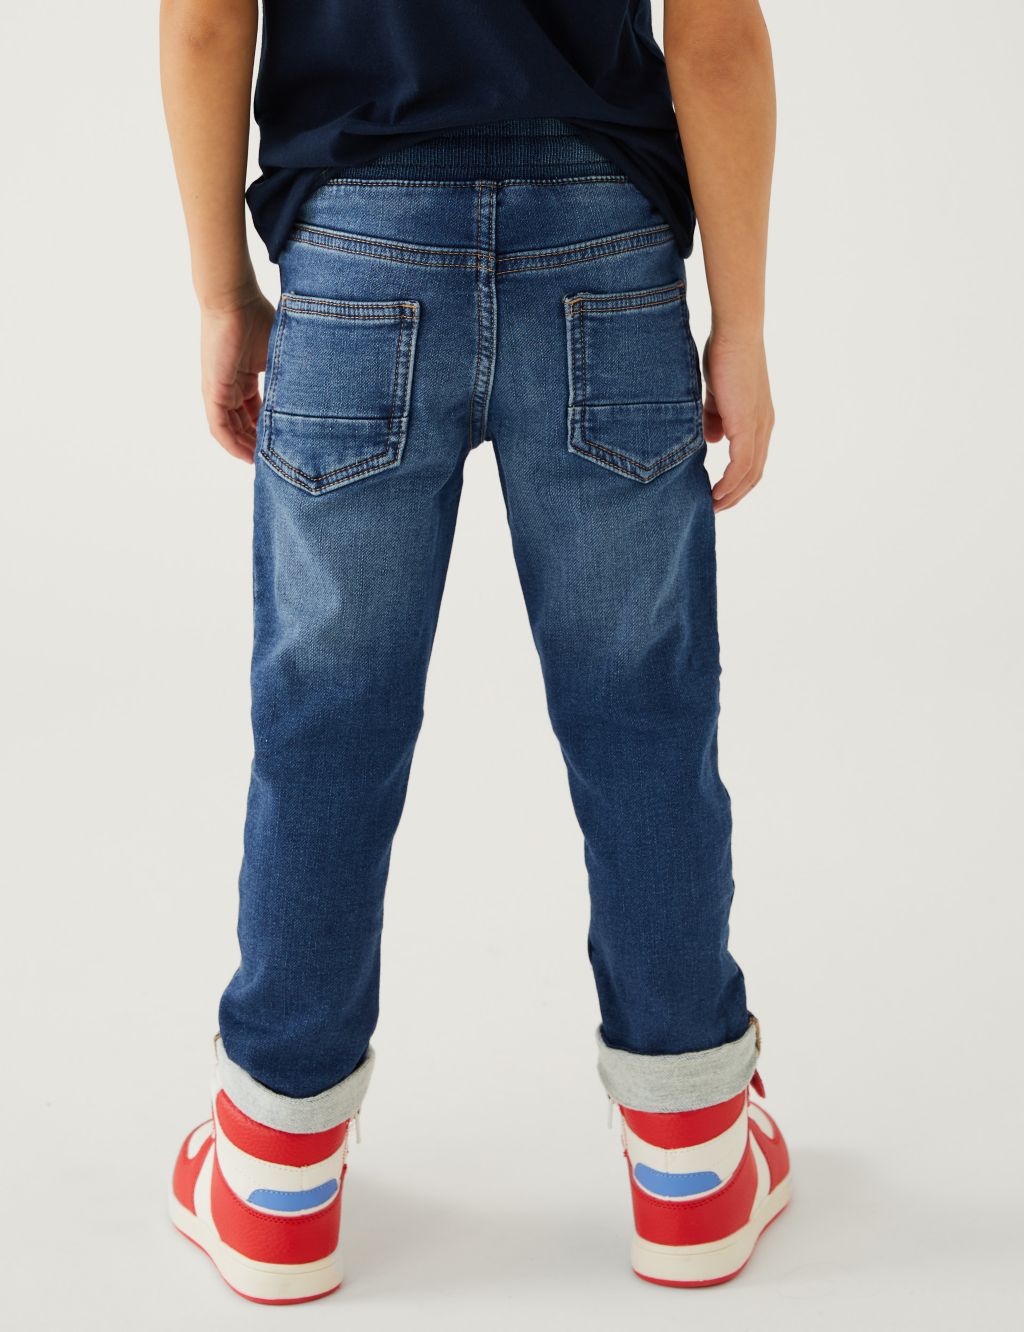 Skinny Fit Comfort Stretch Jeans (2-7 Yrs) image 4